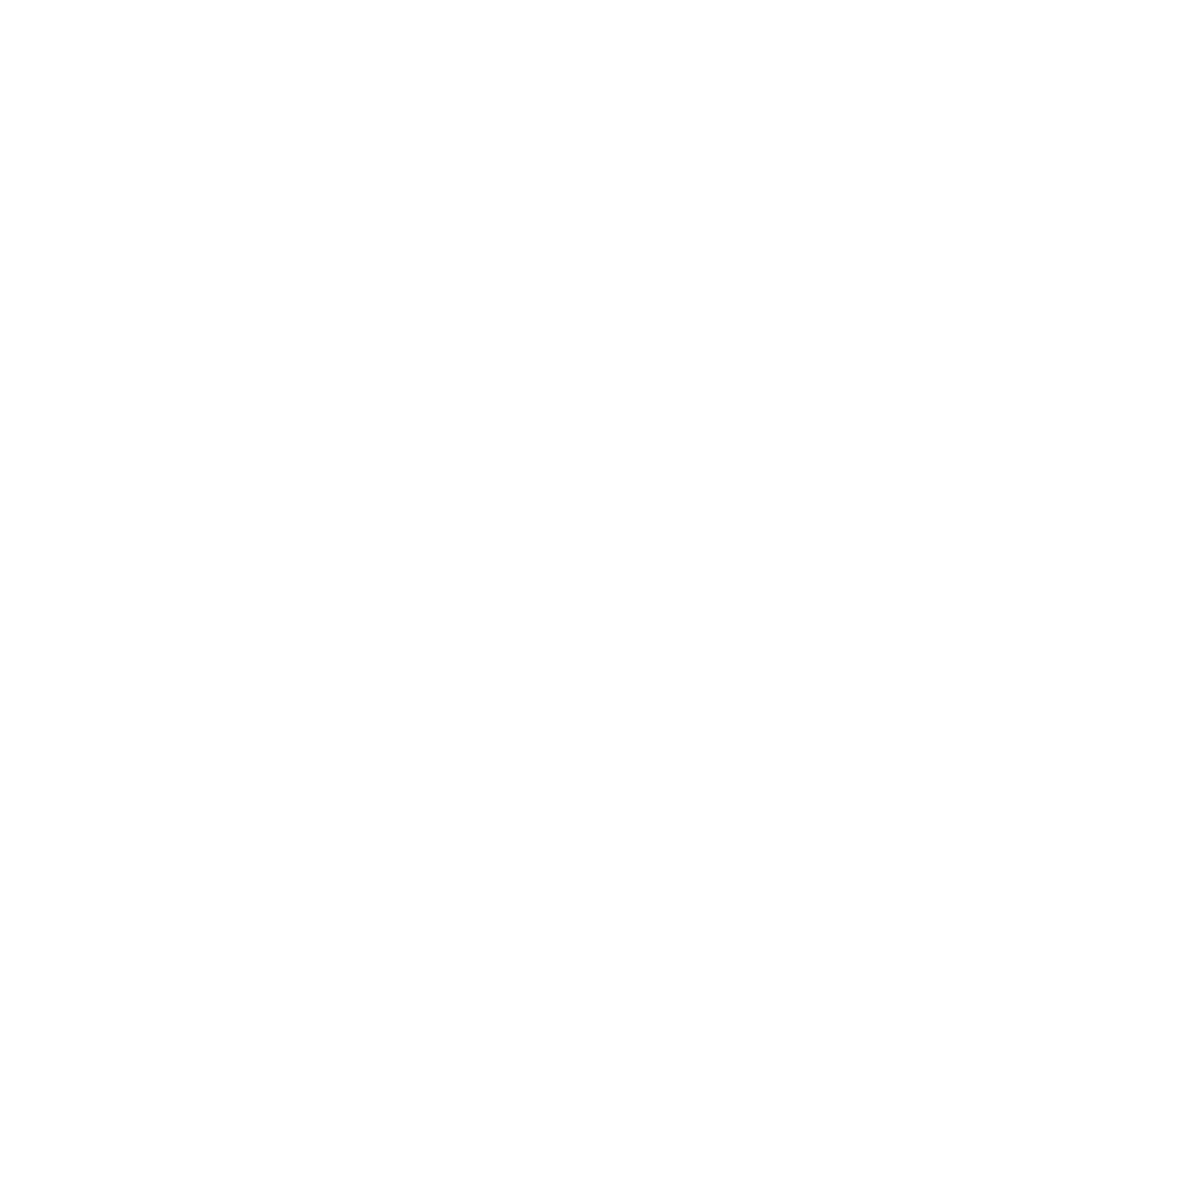 Outline of Bucky the Badger head with the words Day of the badger below the outline.